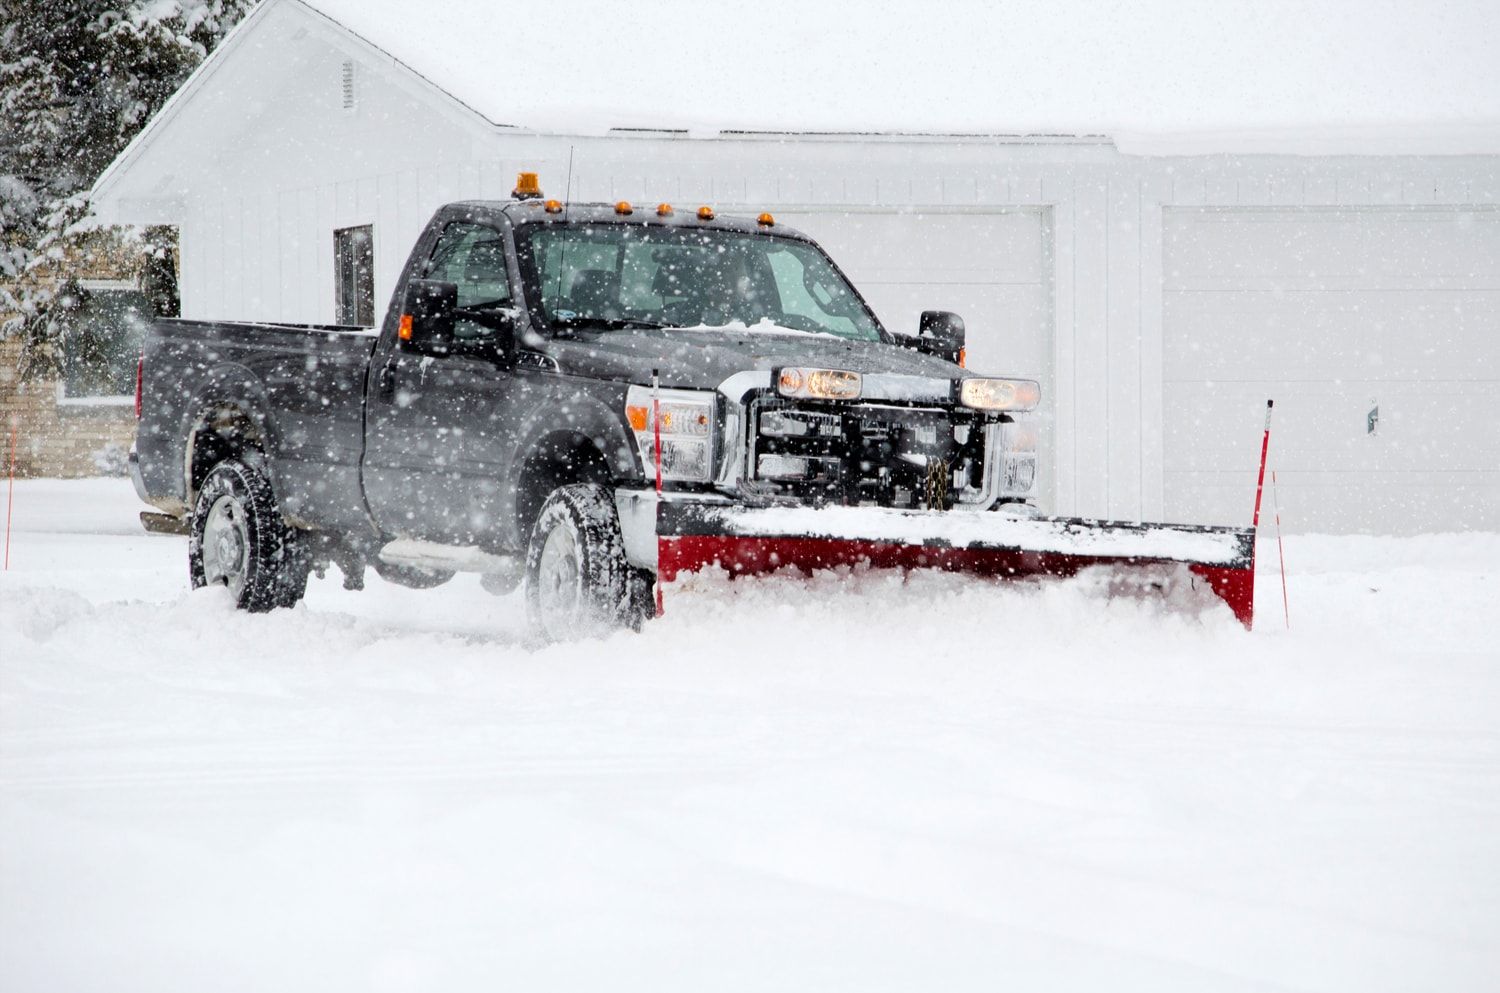 Powerful snow plow truck in action, efficiently clearing snow-covered roads during winter.